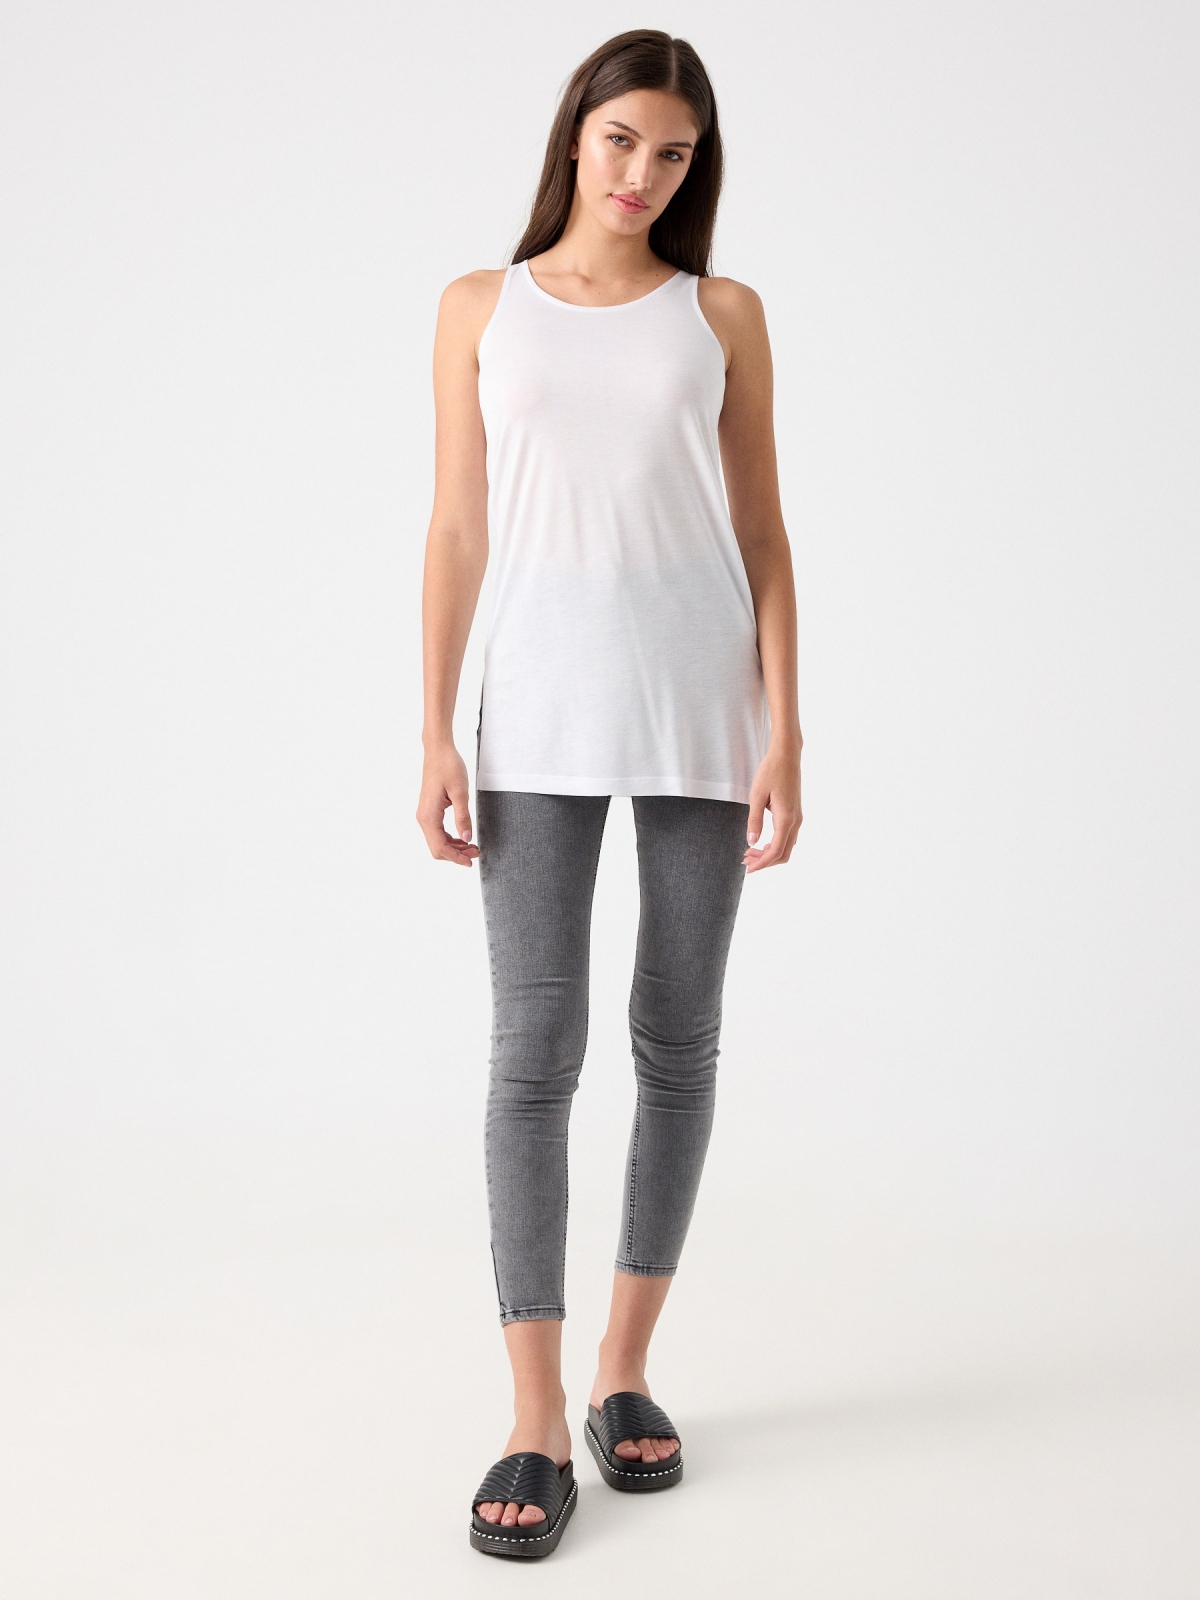 Long t-shirt with side slits white front view